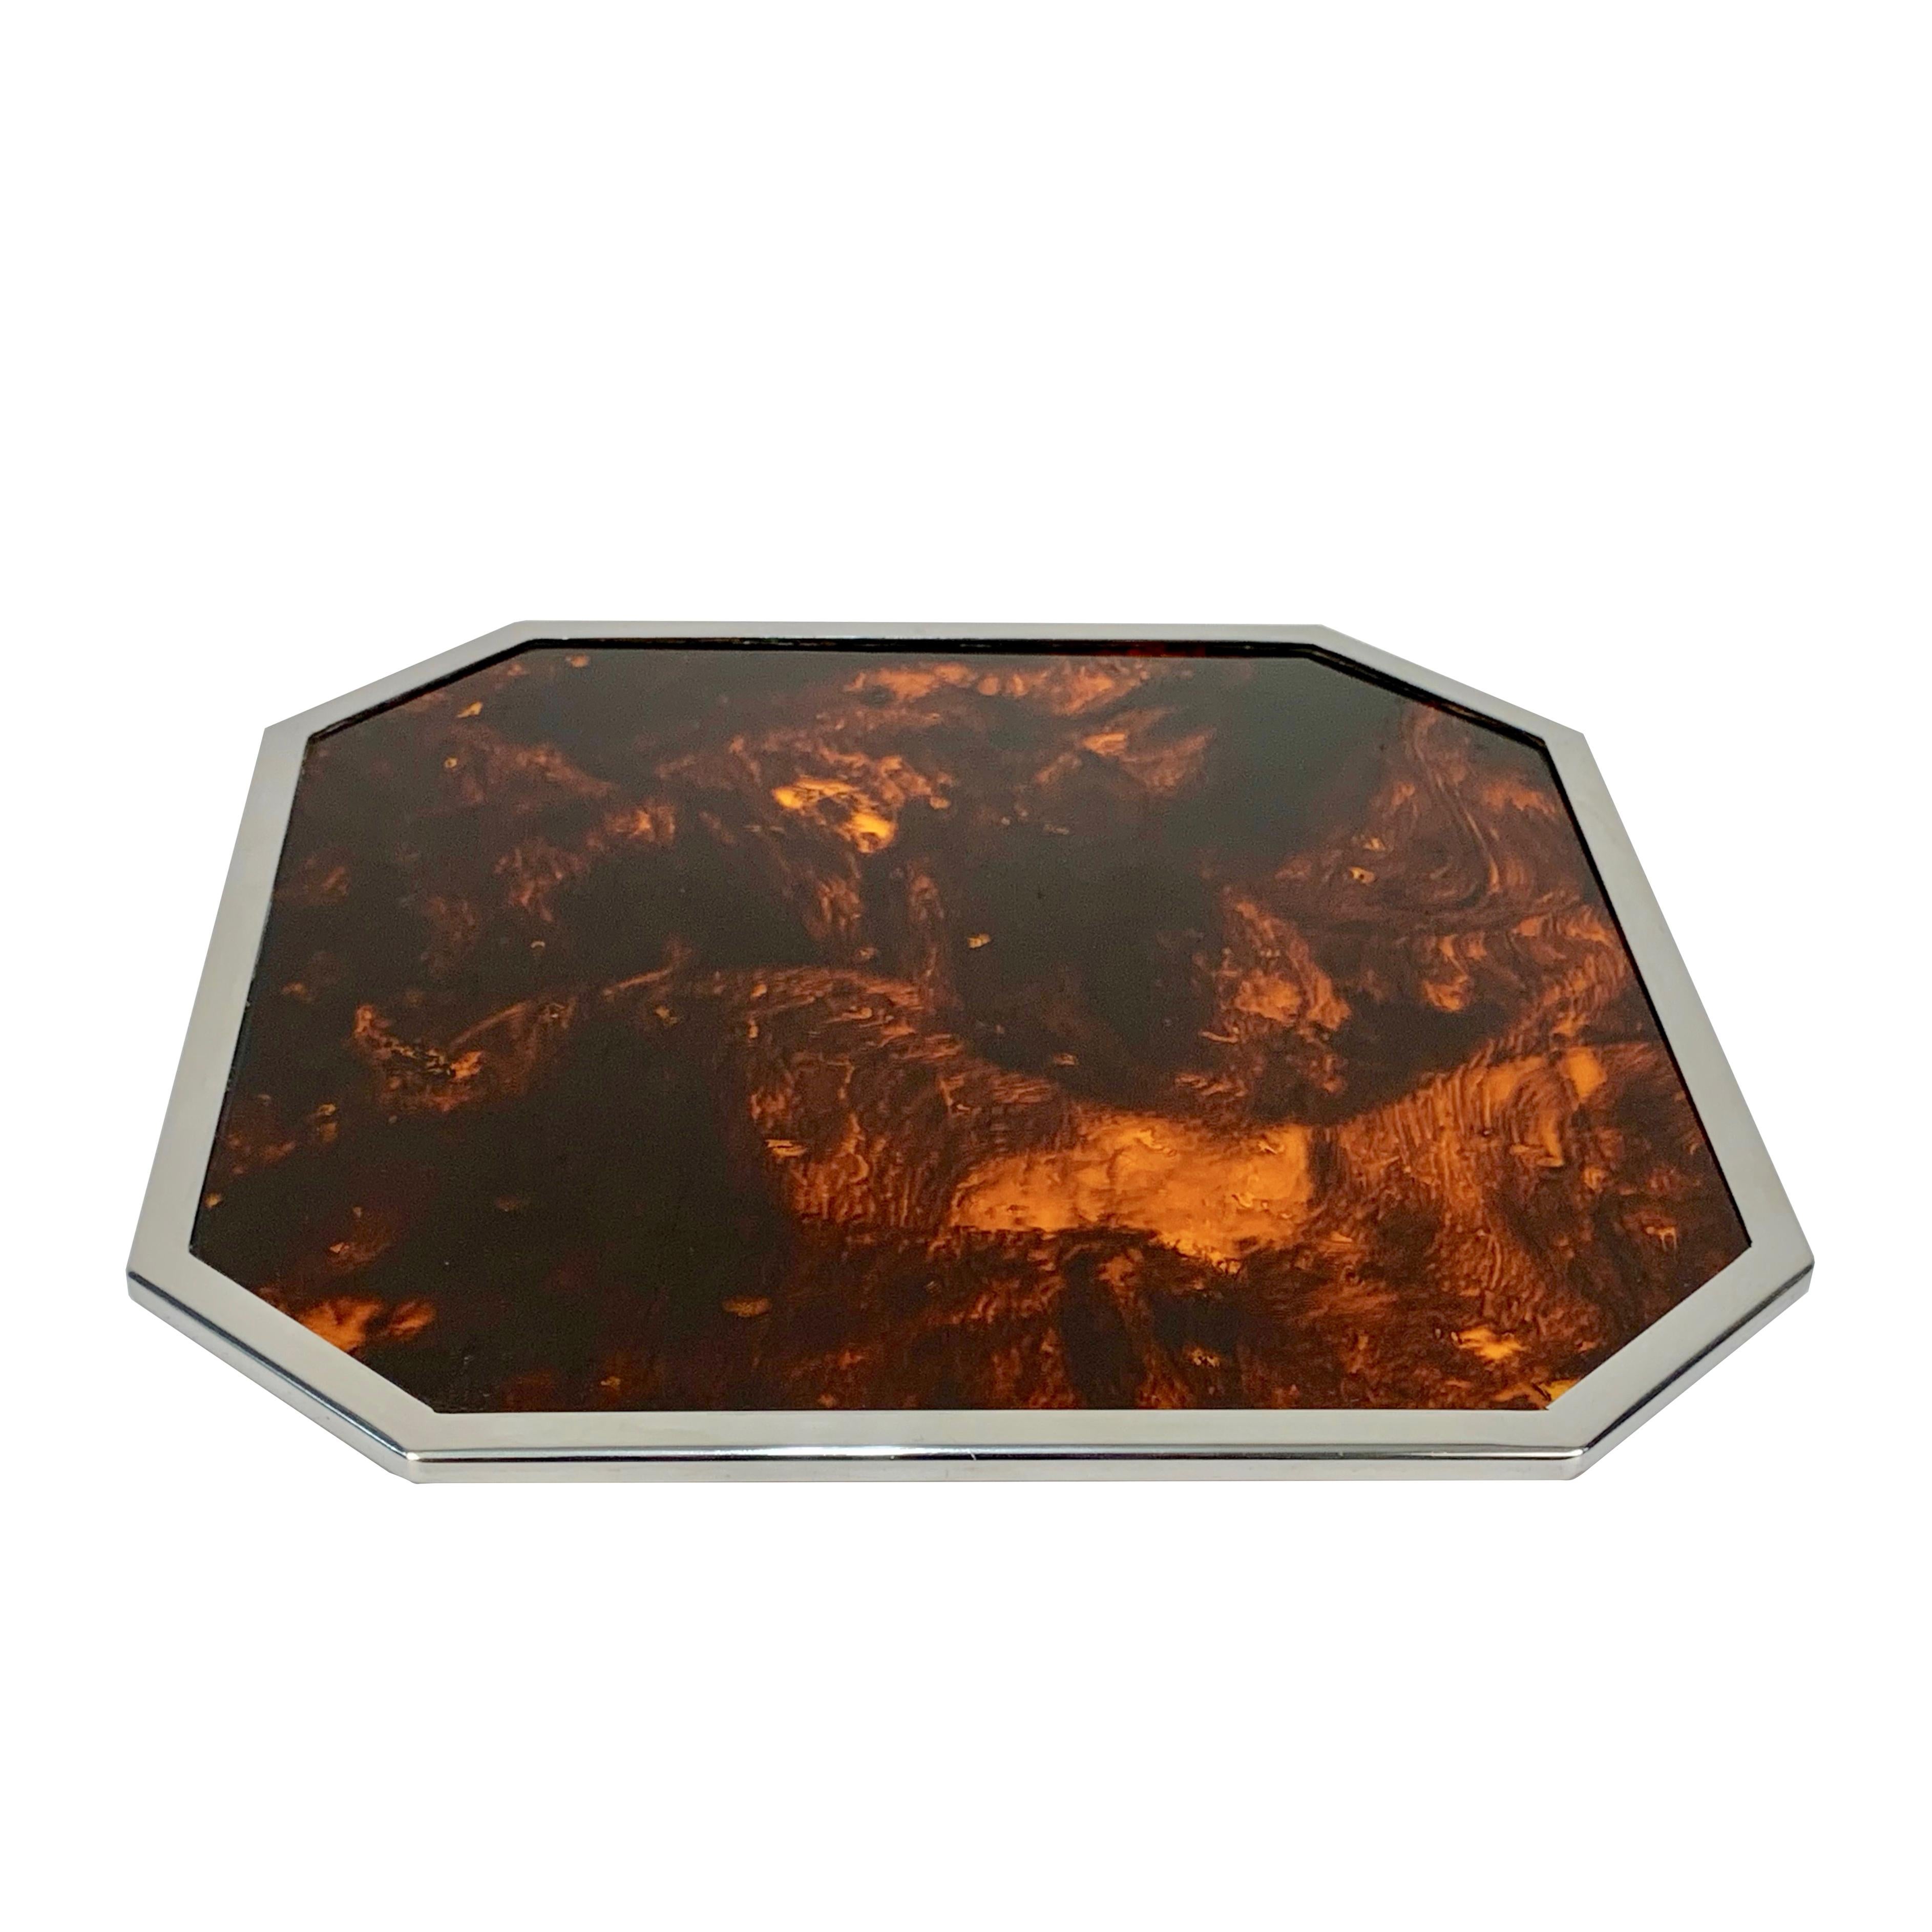 Wonderful midcentury piece of serveware, produced in Italy during the 1970s.

Its design is attributed to Willy Rizzo for a Christian Dior home production.

It is an iconic metal-framed tortoiseshell and Lucite serving tray or platter that will